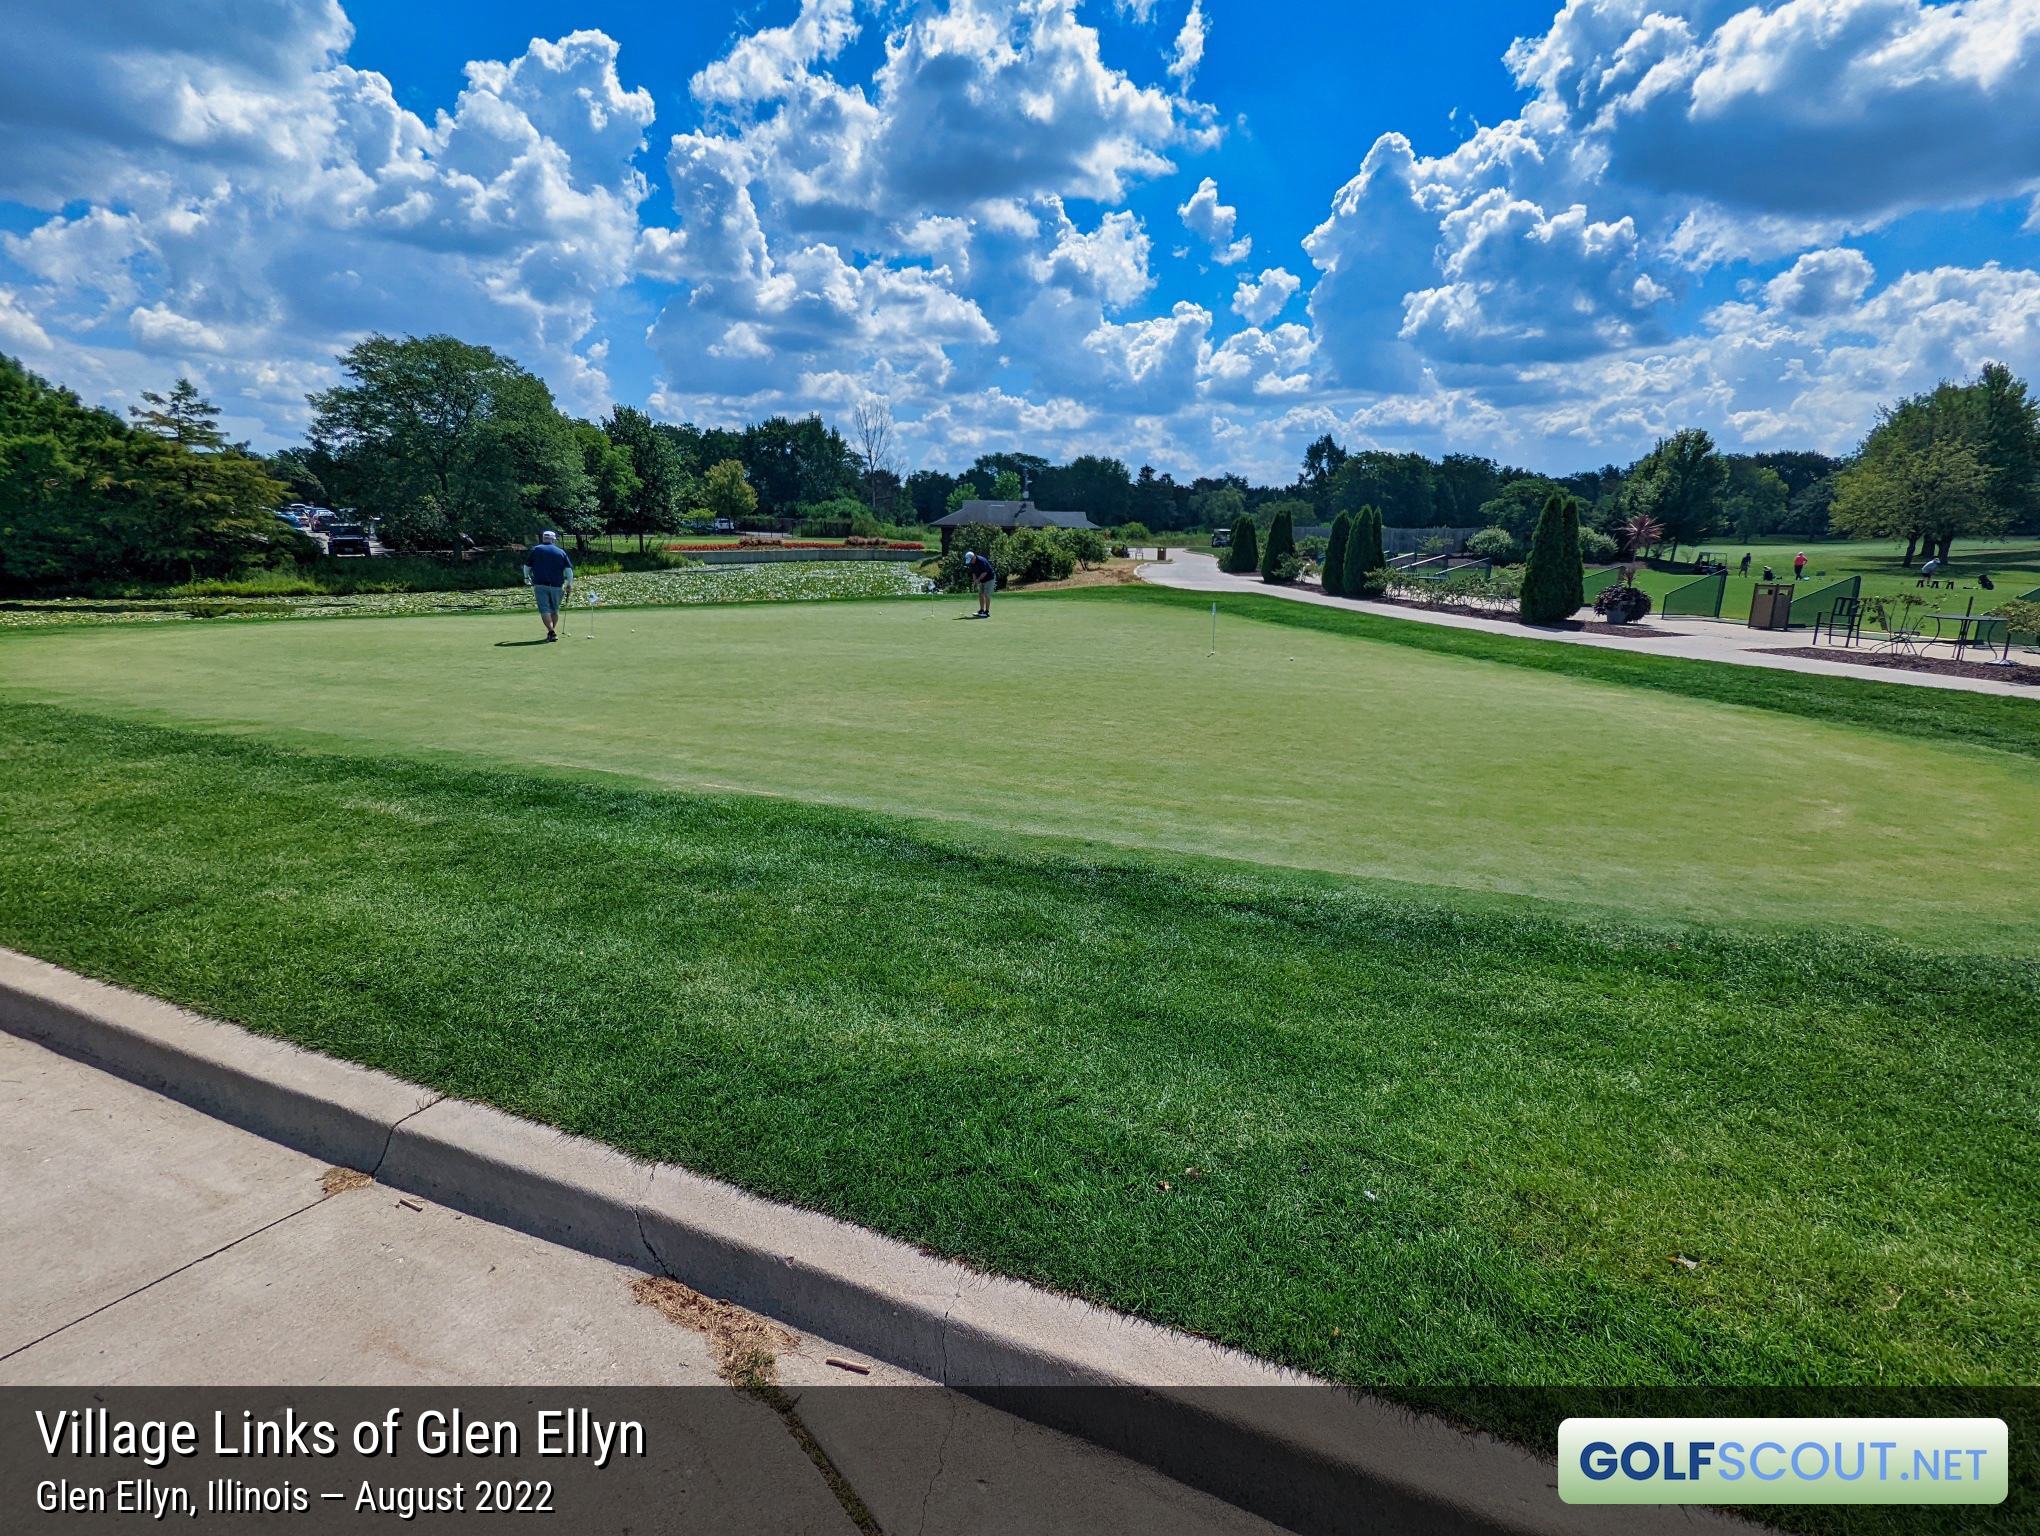 Photo of the practice area at Village Links of Glen Ellyn - 18 Hole Course in Glen Ellyn, Illinois. 